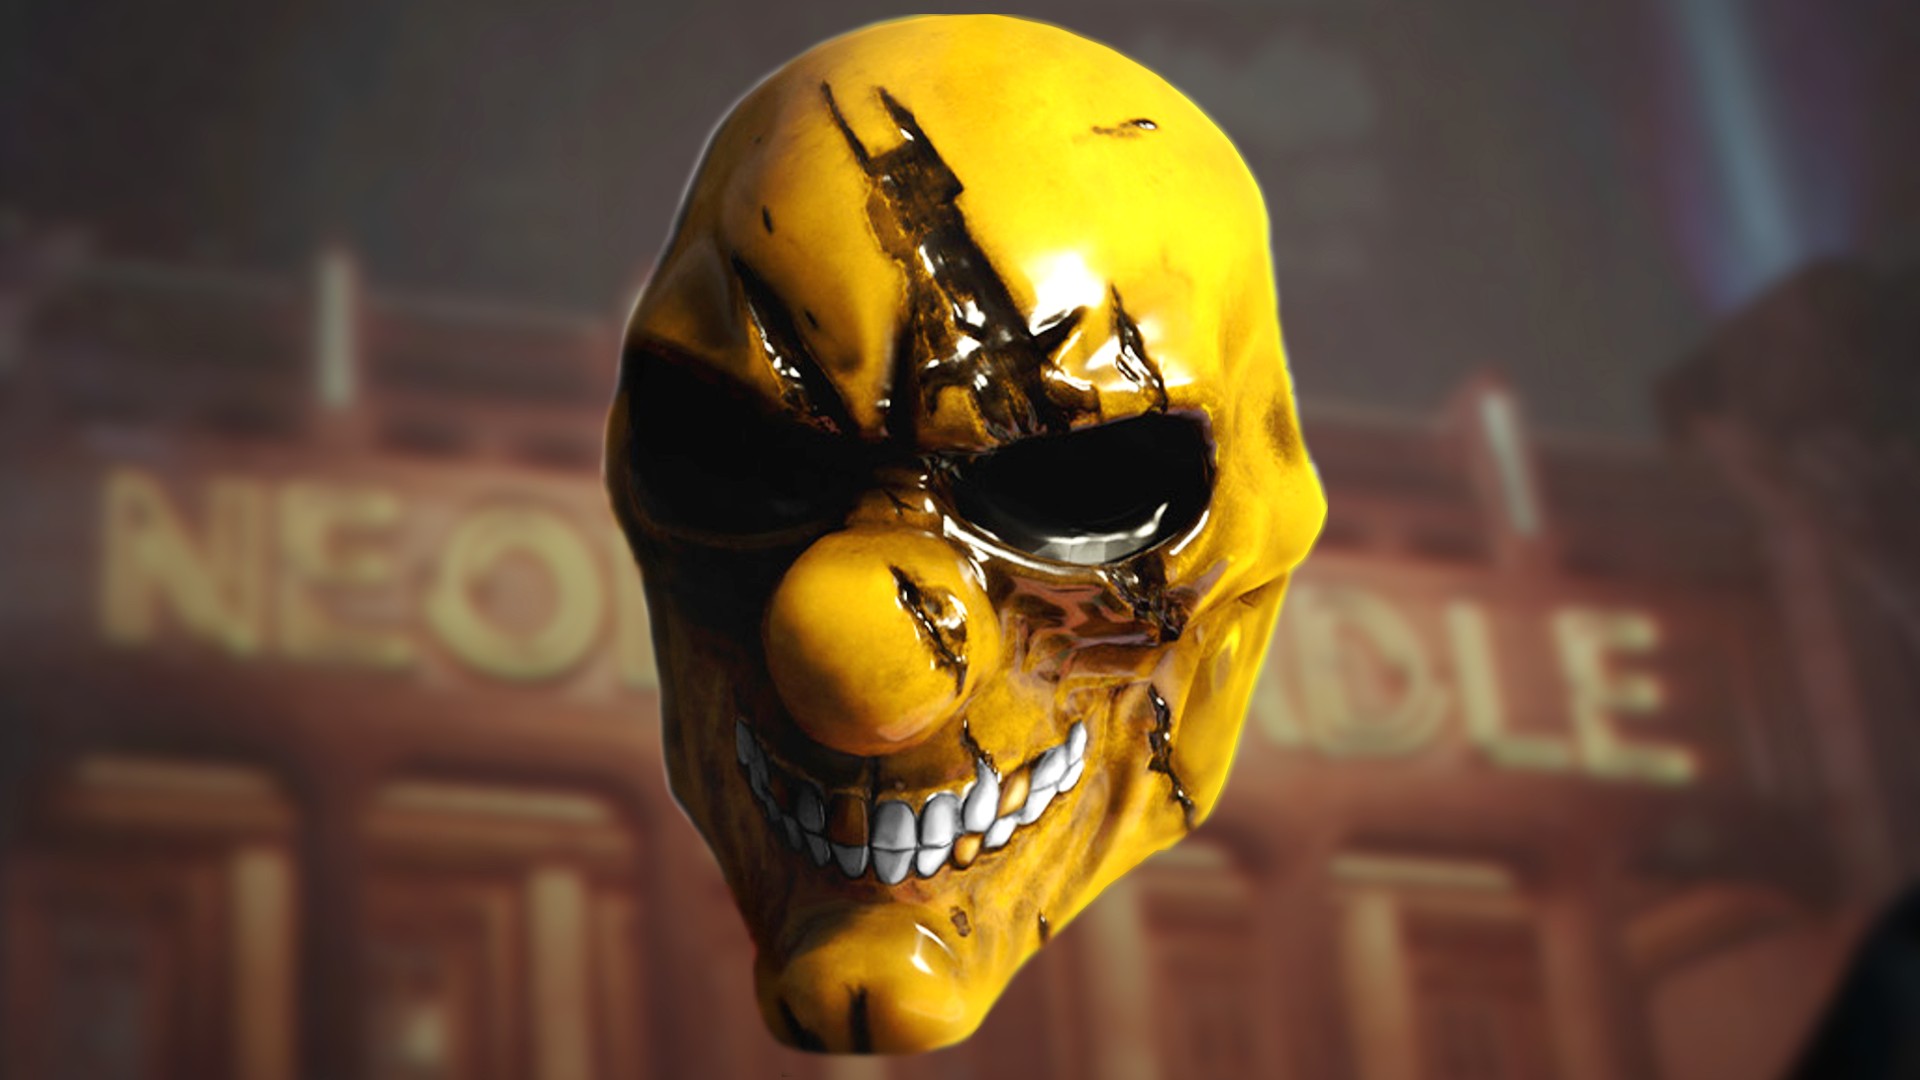 Payday 3 mission list: Every heist available - Dexerto